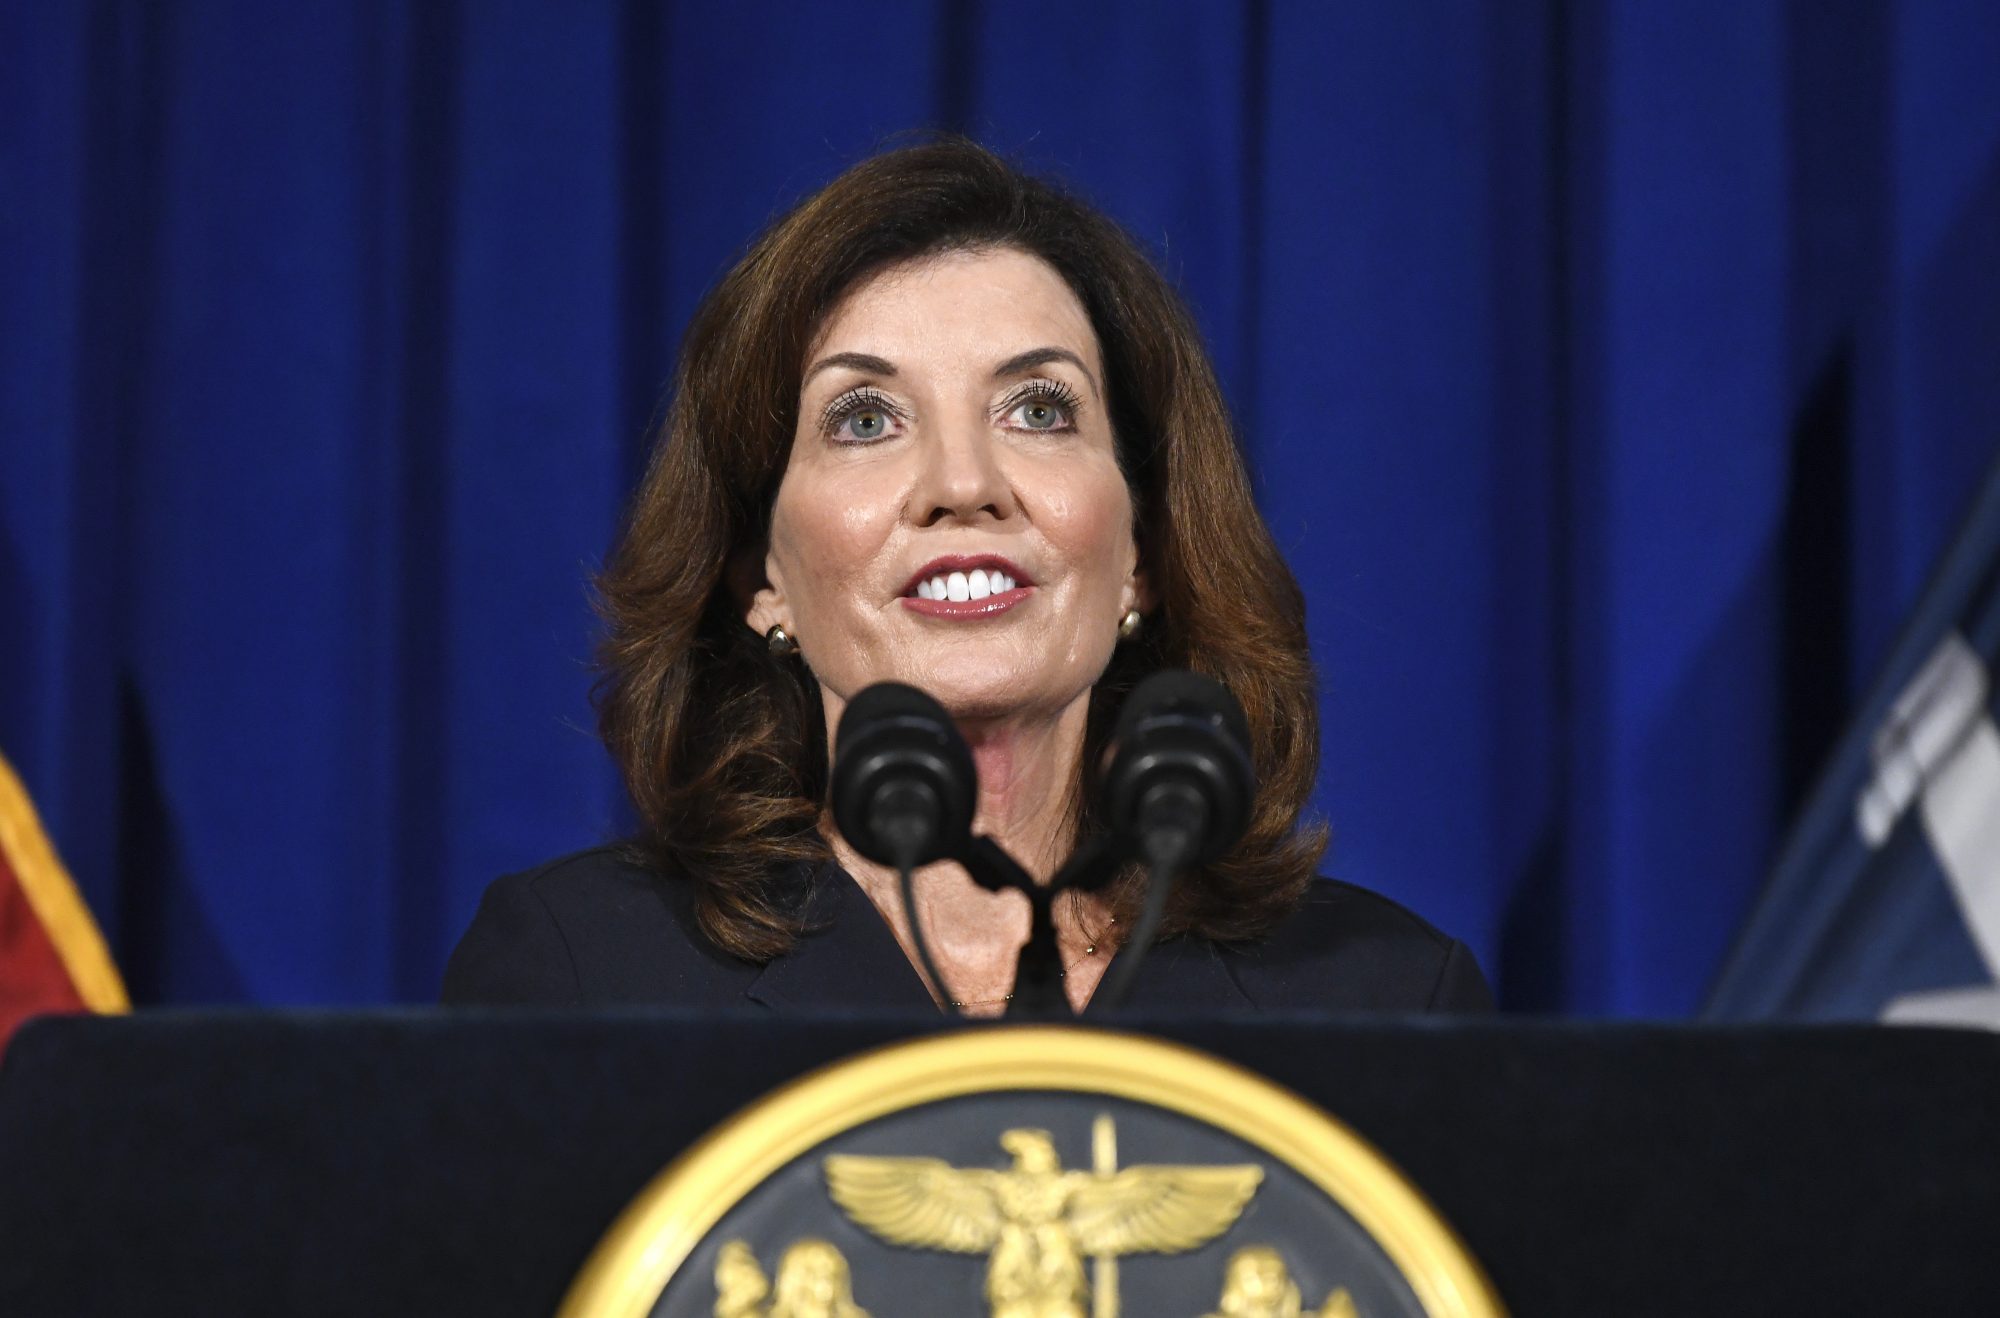 Kathy Hochul sworn in as elected New York governor: ‘Some fights we have to take on’